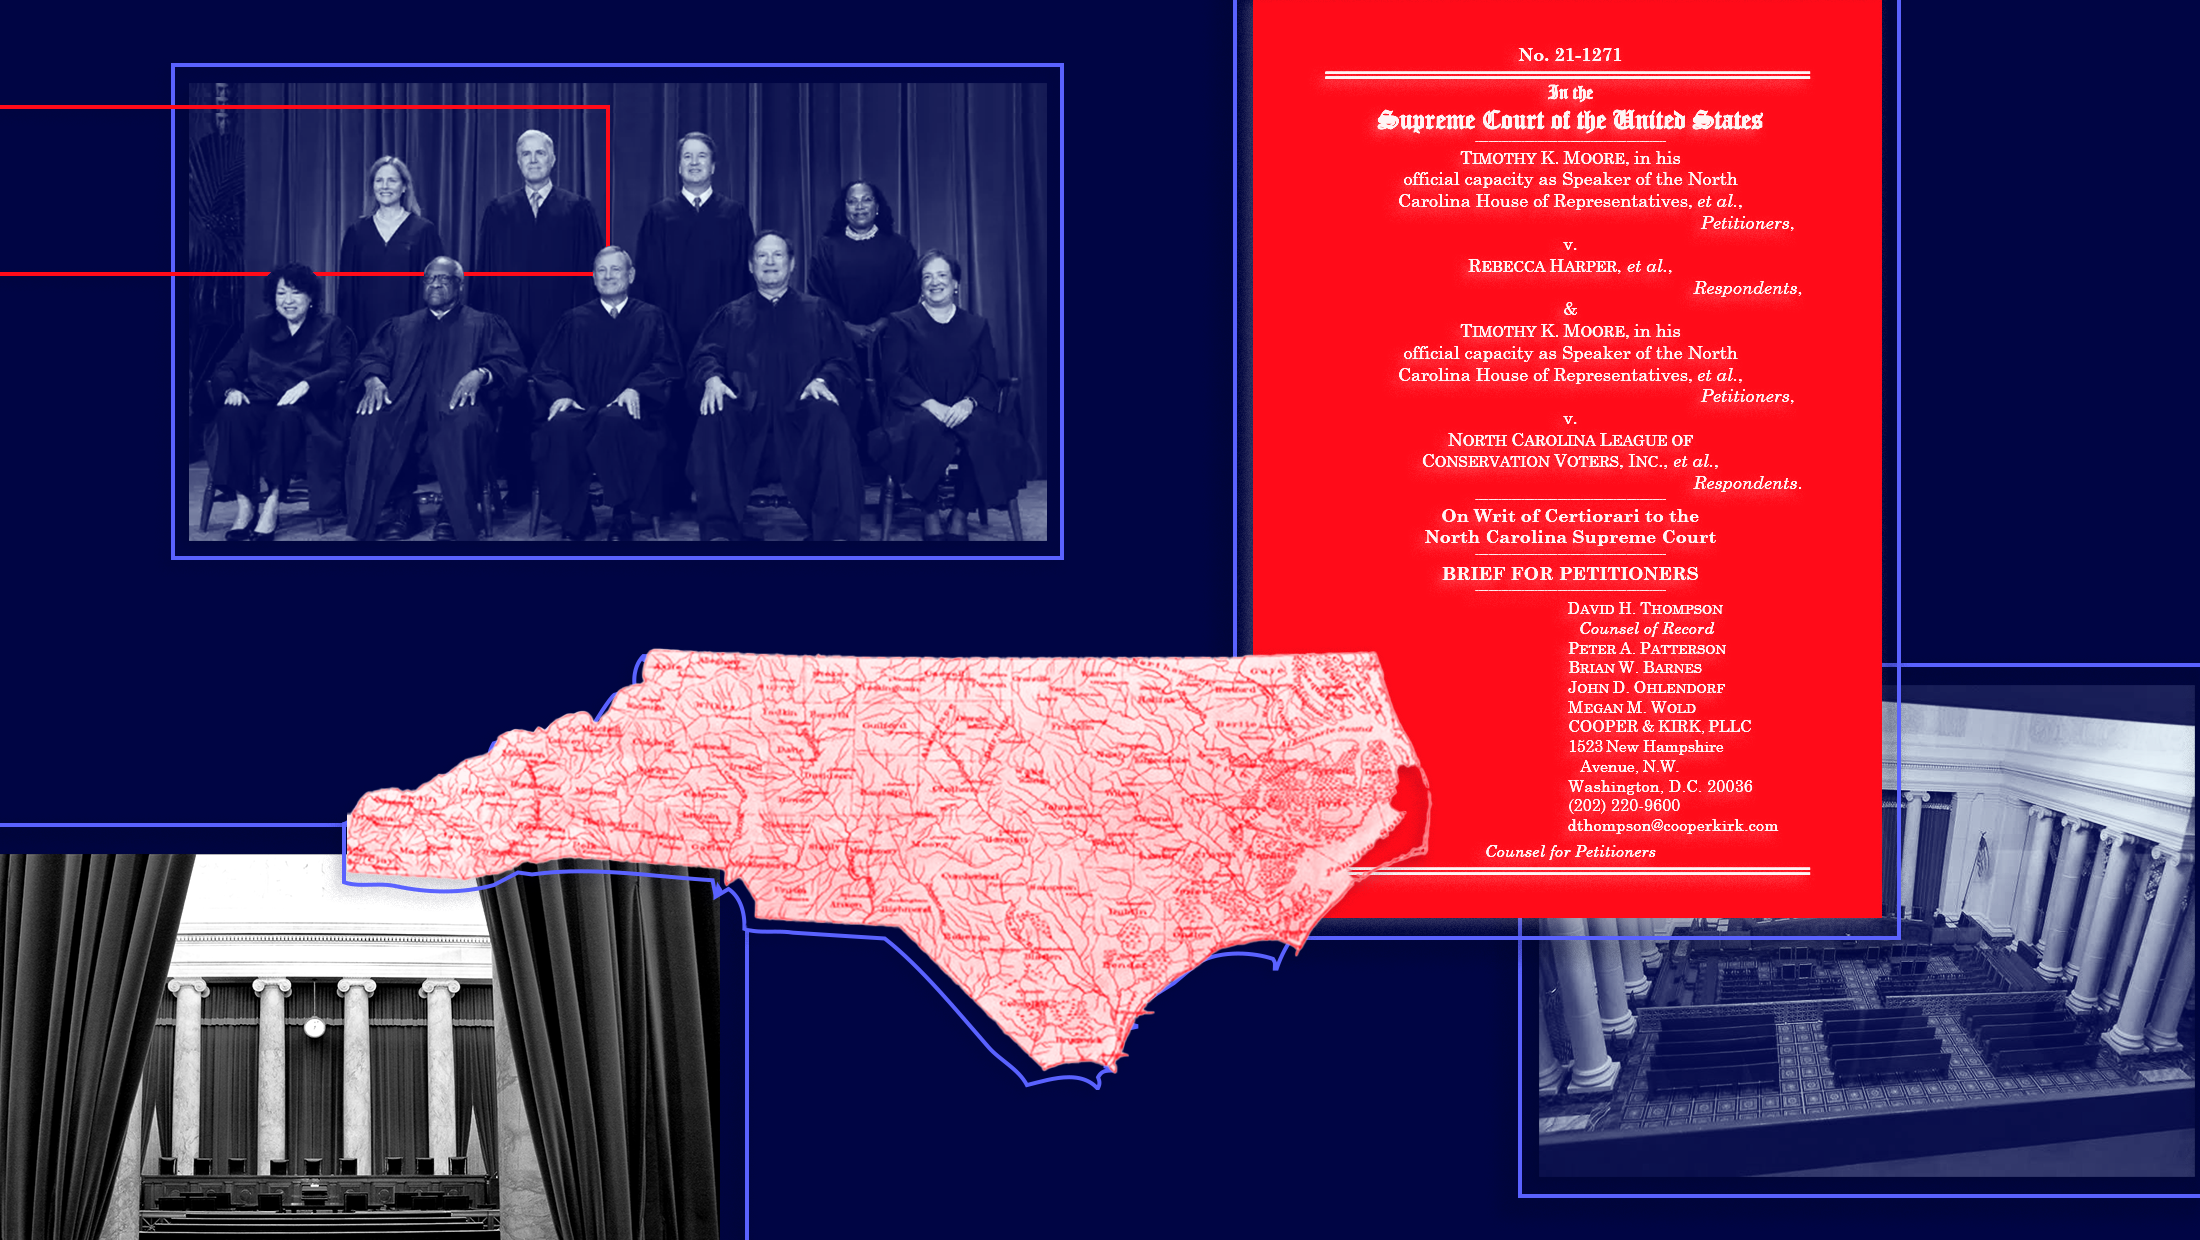 Dark blue background with red map of North Carolina, an image in the top-left corner of all nine U.S. Supreme Court justices with Amy Coney Barrett and Neil Gorsuch outlines in red, the Petitioner's Reply in red and black-and-white images of the inside of the U.S. Supreme Court.